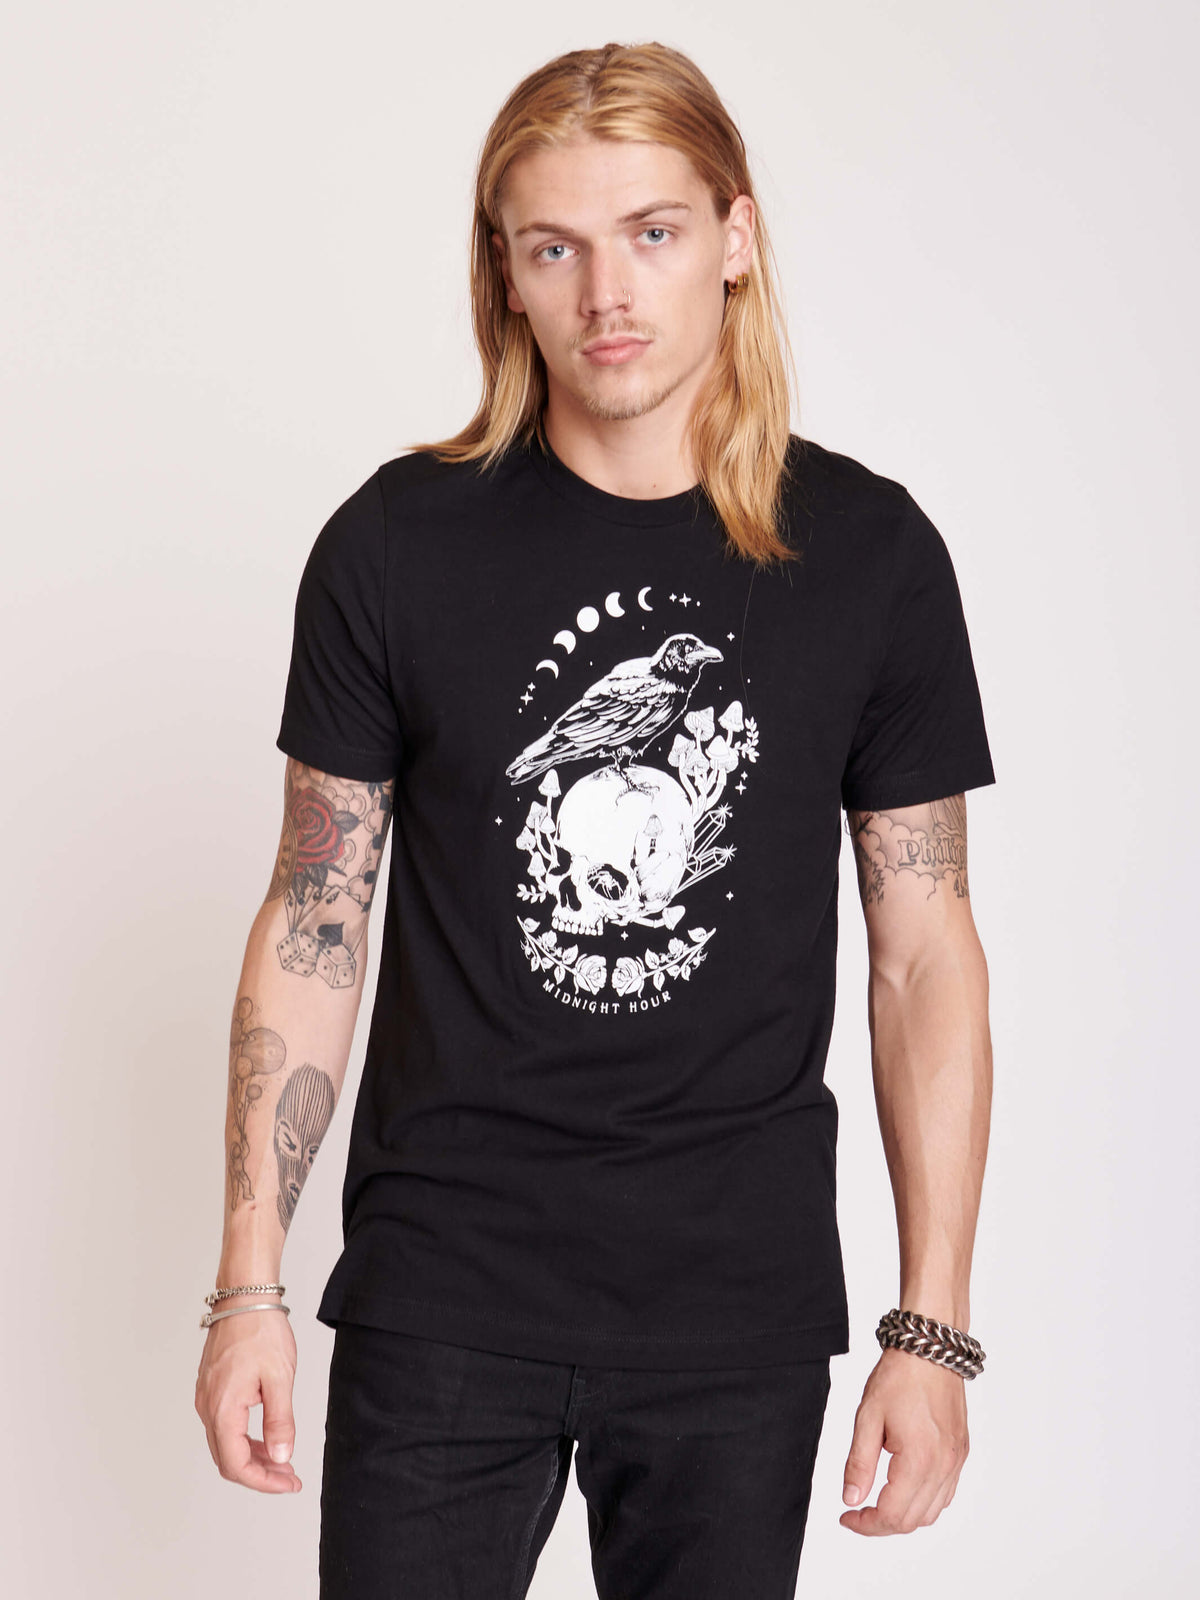 Shroomin&#39; Crows Unisex T-Shirt goth rock fashion, skulls, mushroom, crows, moon phases. Shroomin&#39; Crows T-shirt. Unisex, goth fashion. Goth grunge clothing, skull print, moon phase, black crow, musnrooms, witchy vibes